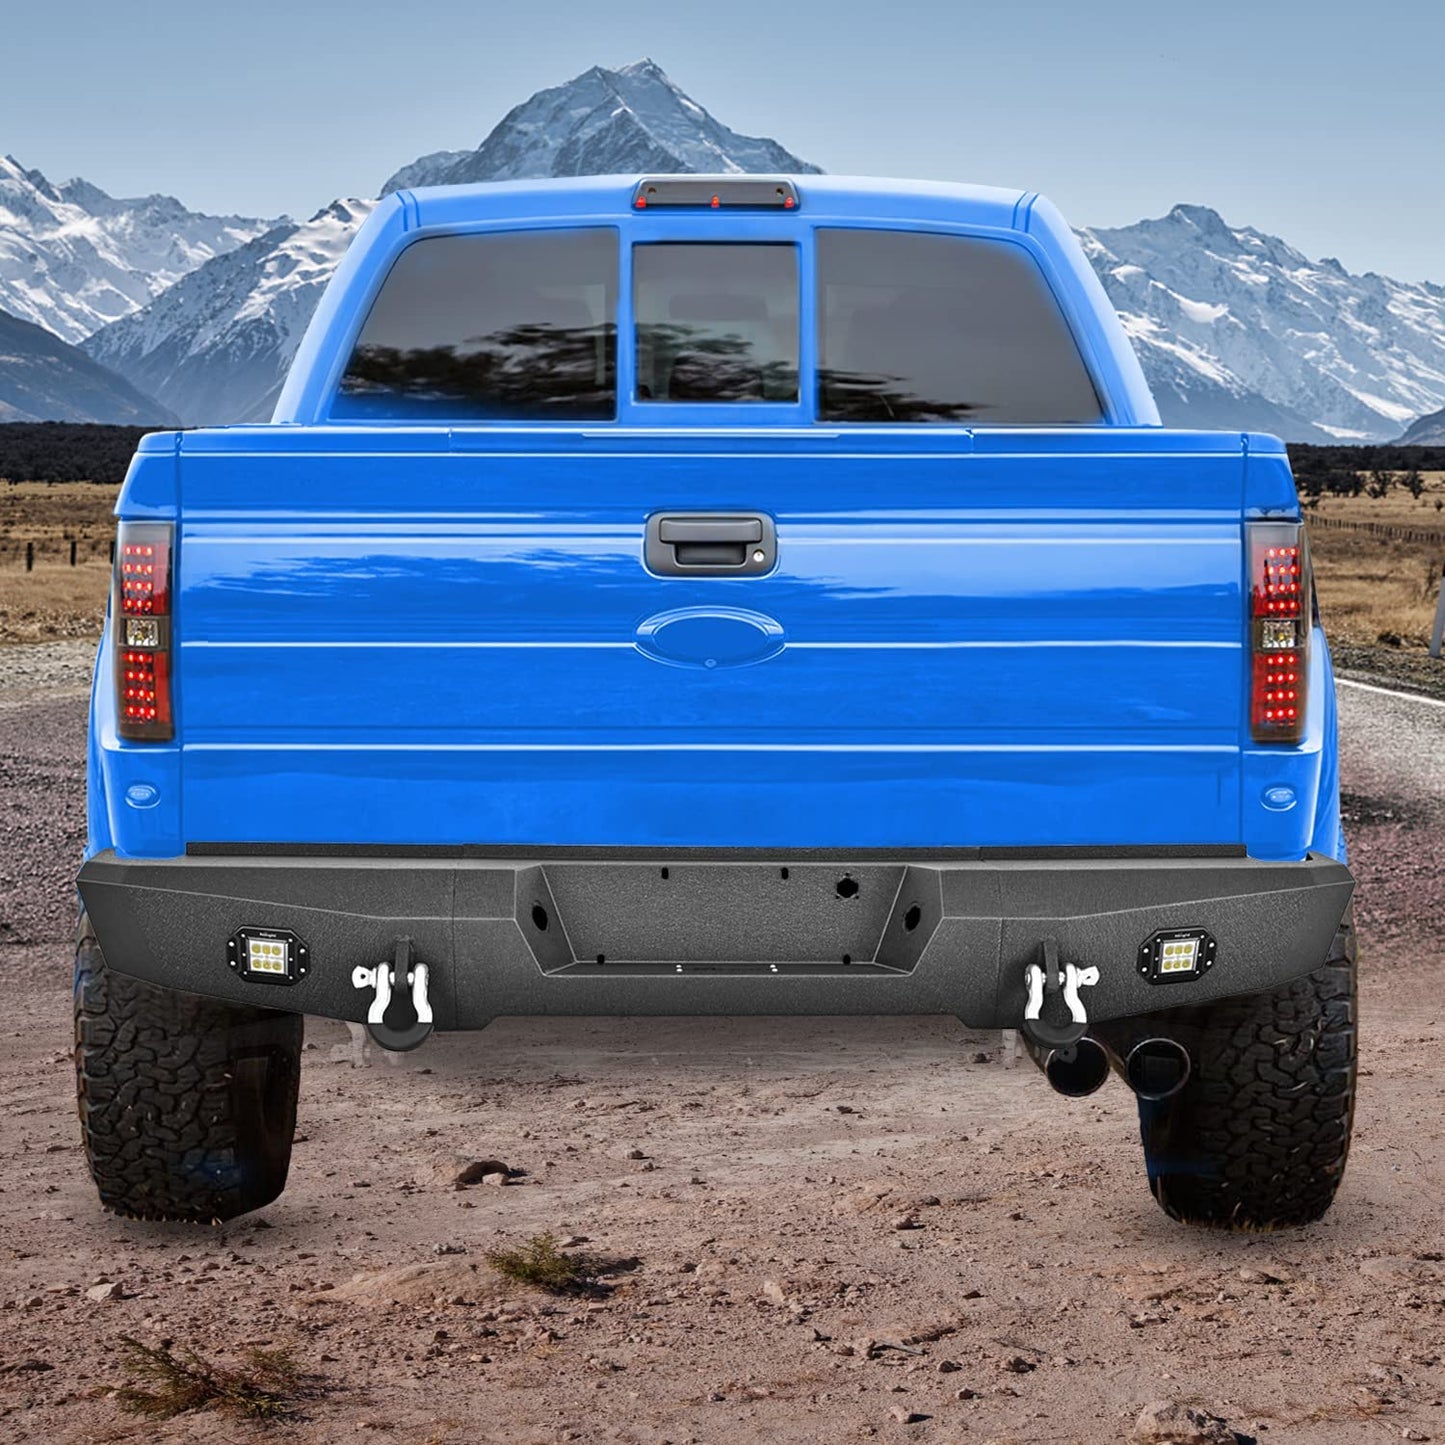 Installed on Car Nilight Rear Step Bumper For 2009-2014 Ford F-150